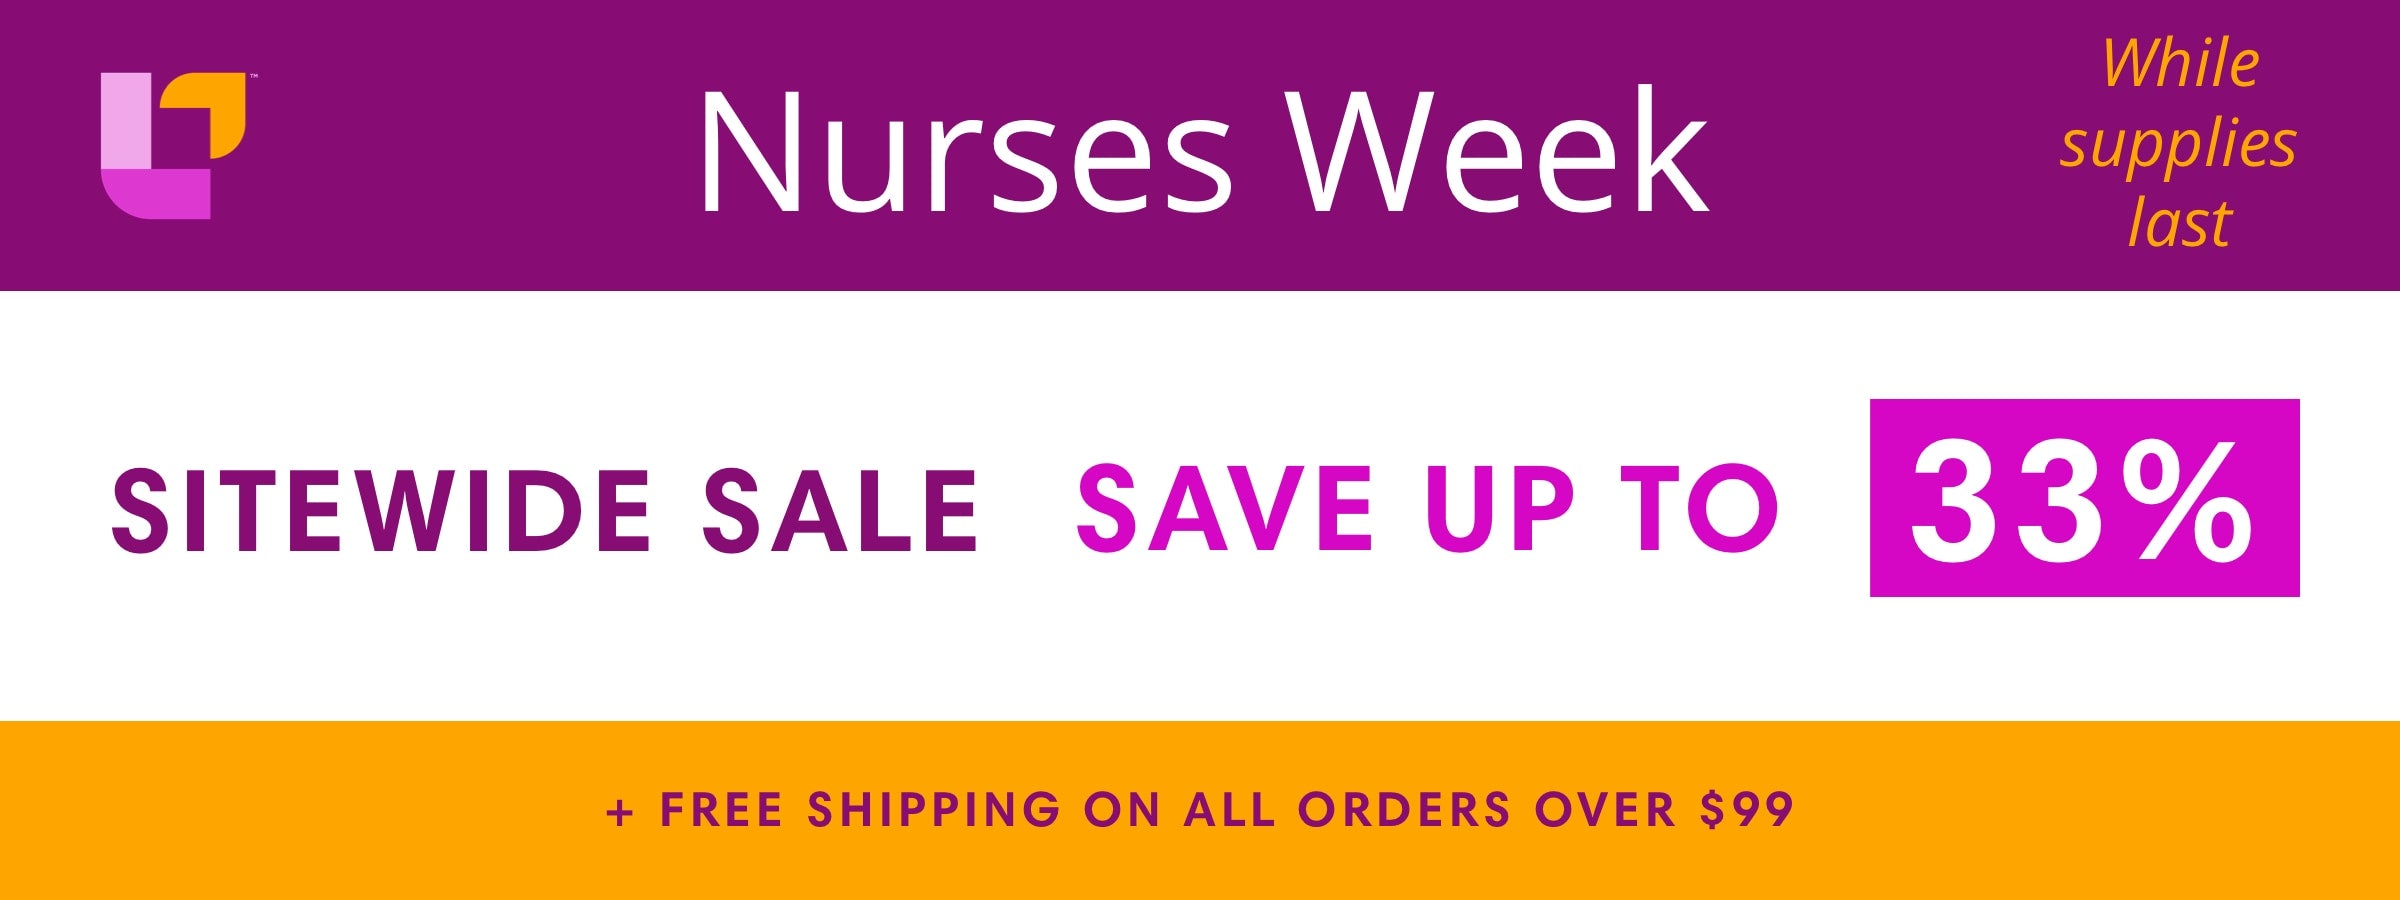 Nurses Week While supplies last SITEWIDE SALE SAVE UP TO 33% + FREE SHIPPING ON ALL ORDERS OVER $99